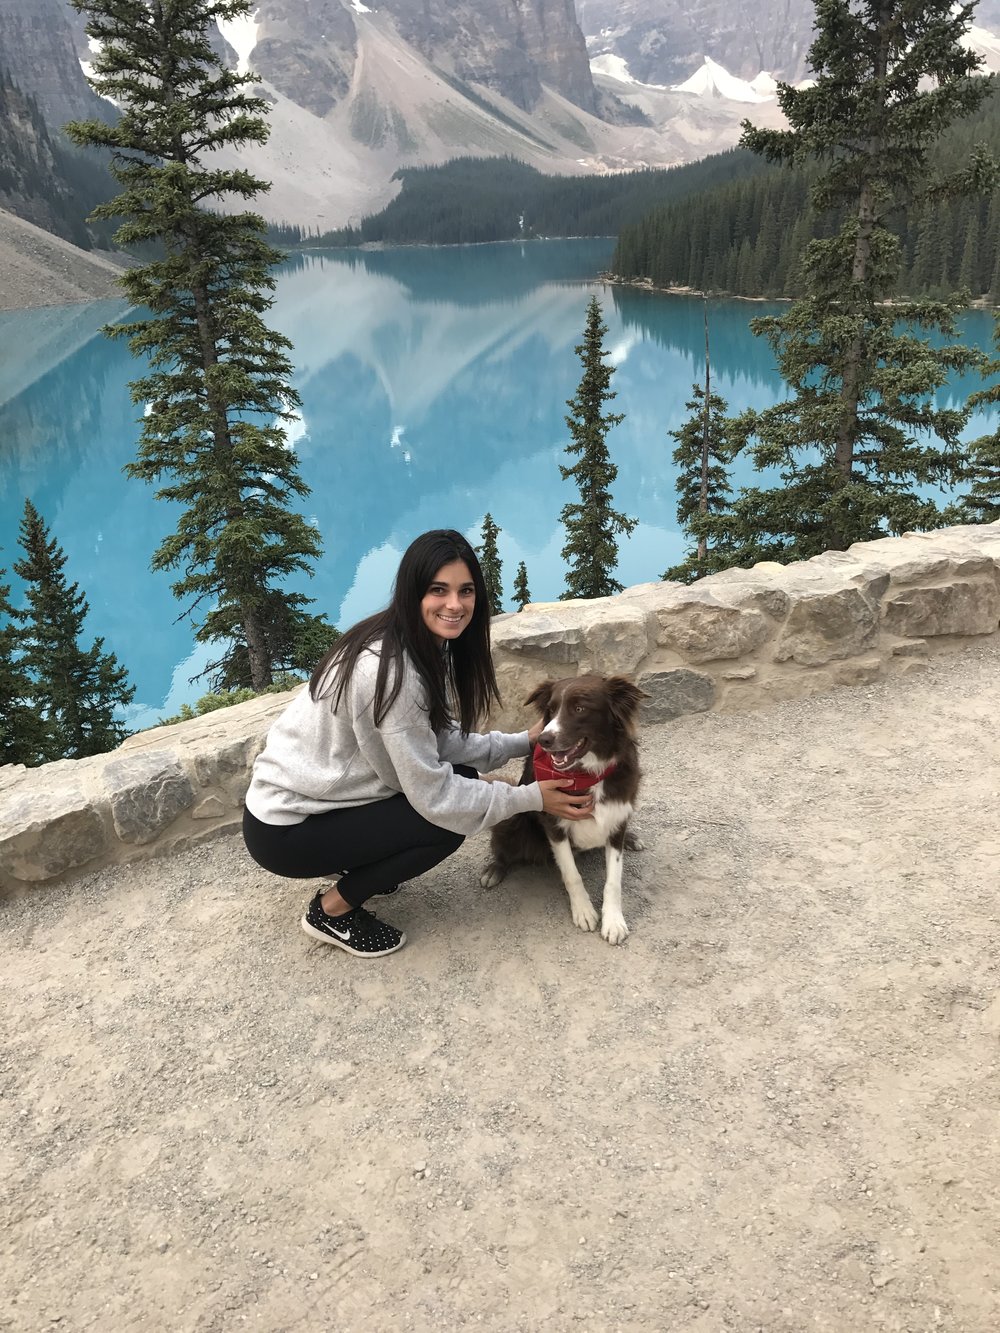 Erica, our Marketing Coordinator and her dog, Iggy at Moraine Lake.